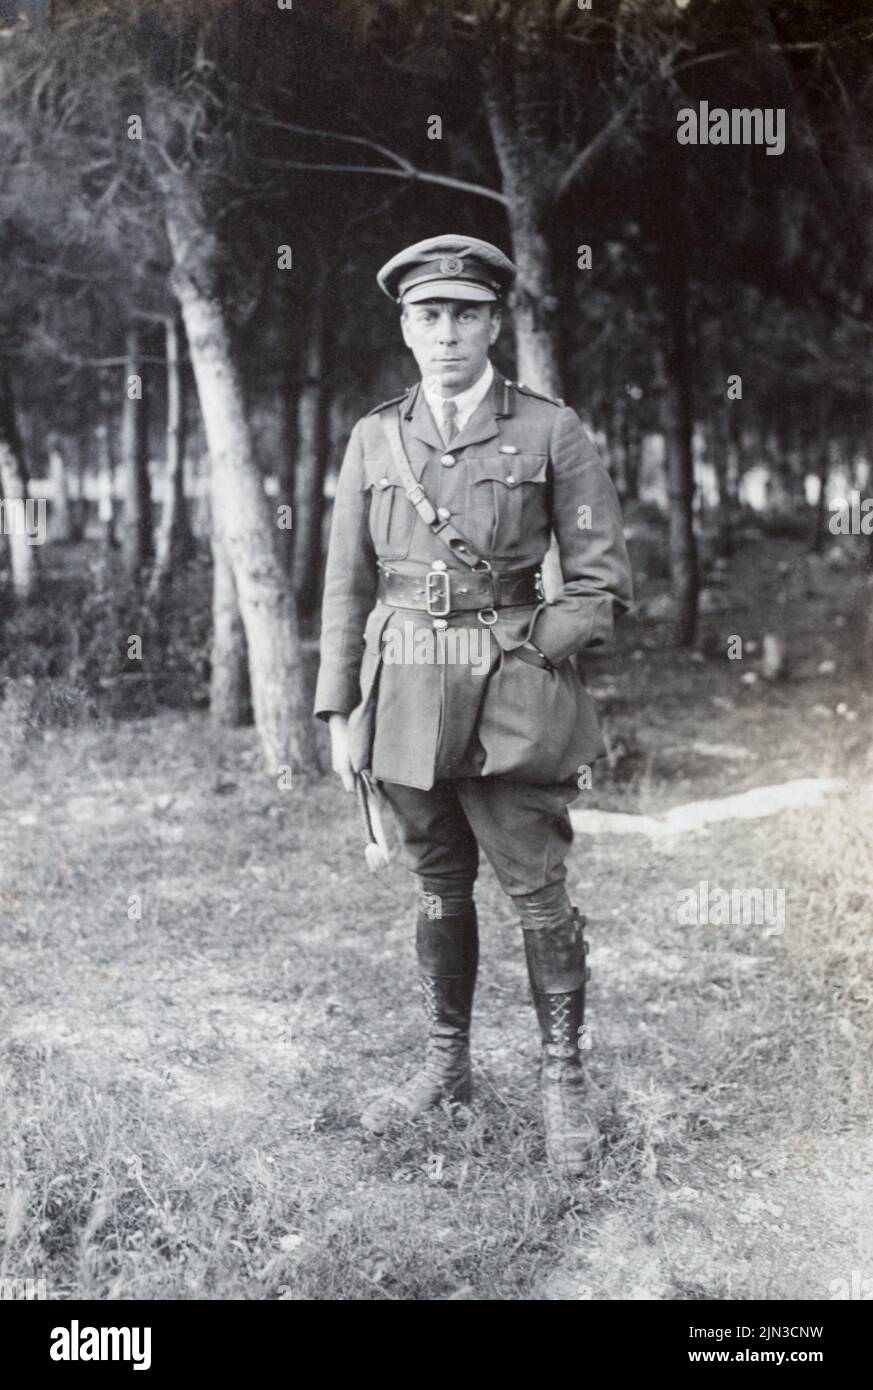 A First World War era picture of a British army staff officer in the ...